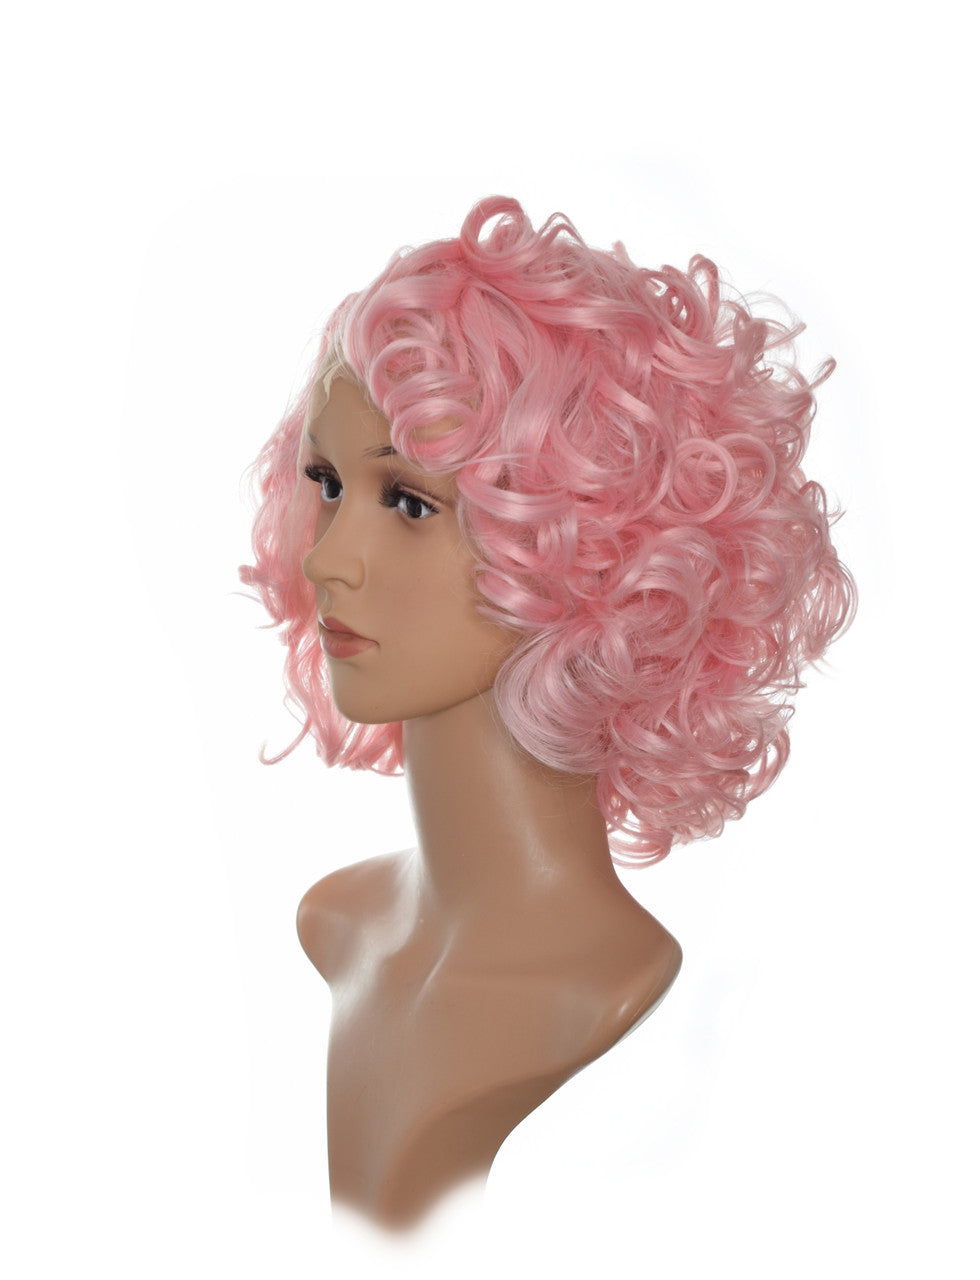 Pink Marilyn Style Lace Front Short Curly Wig. Bubblegum Pink Highlights